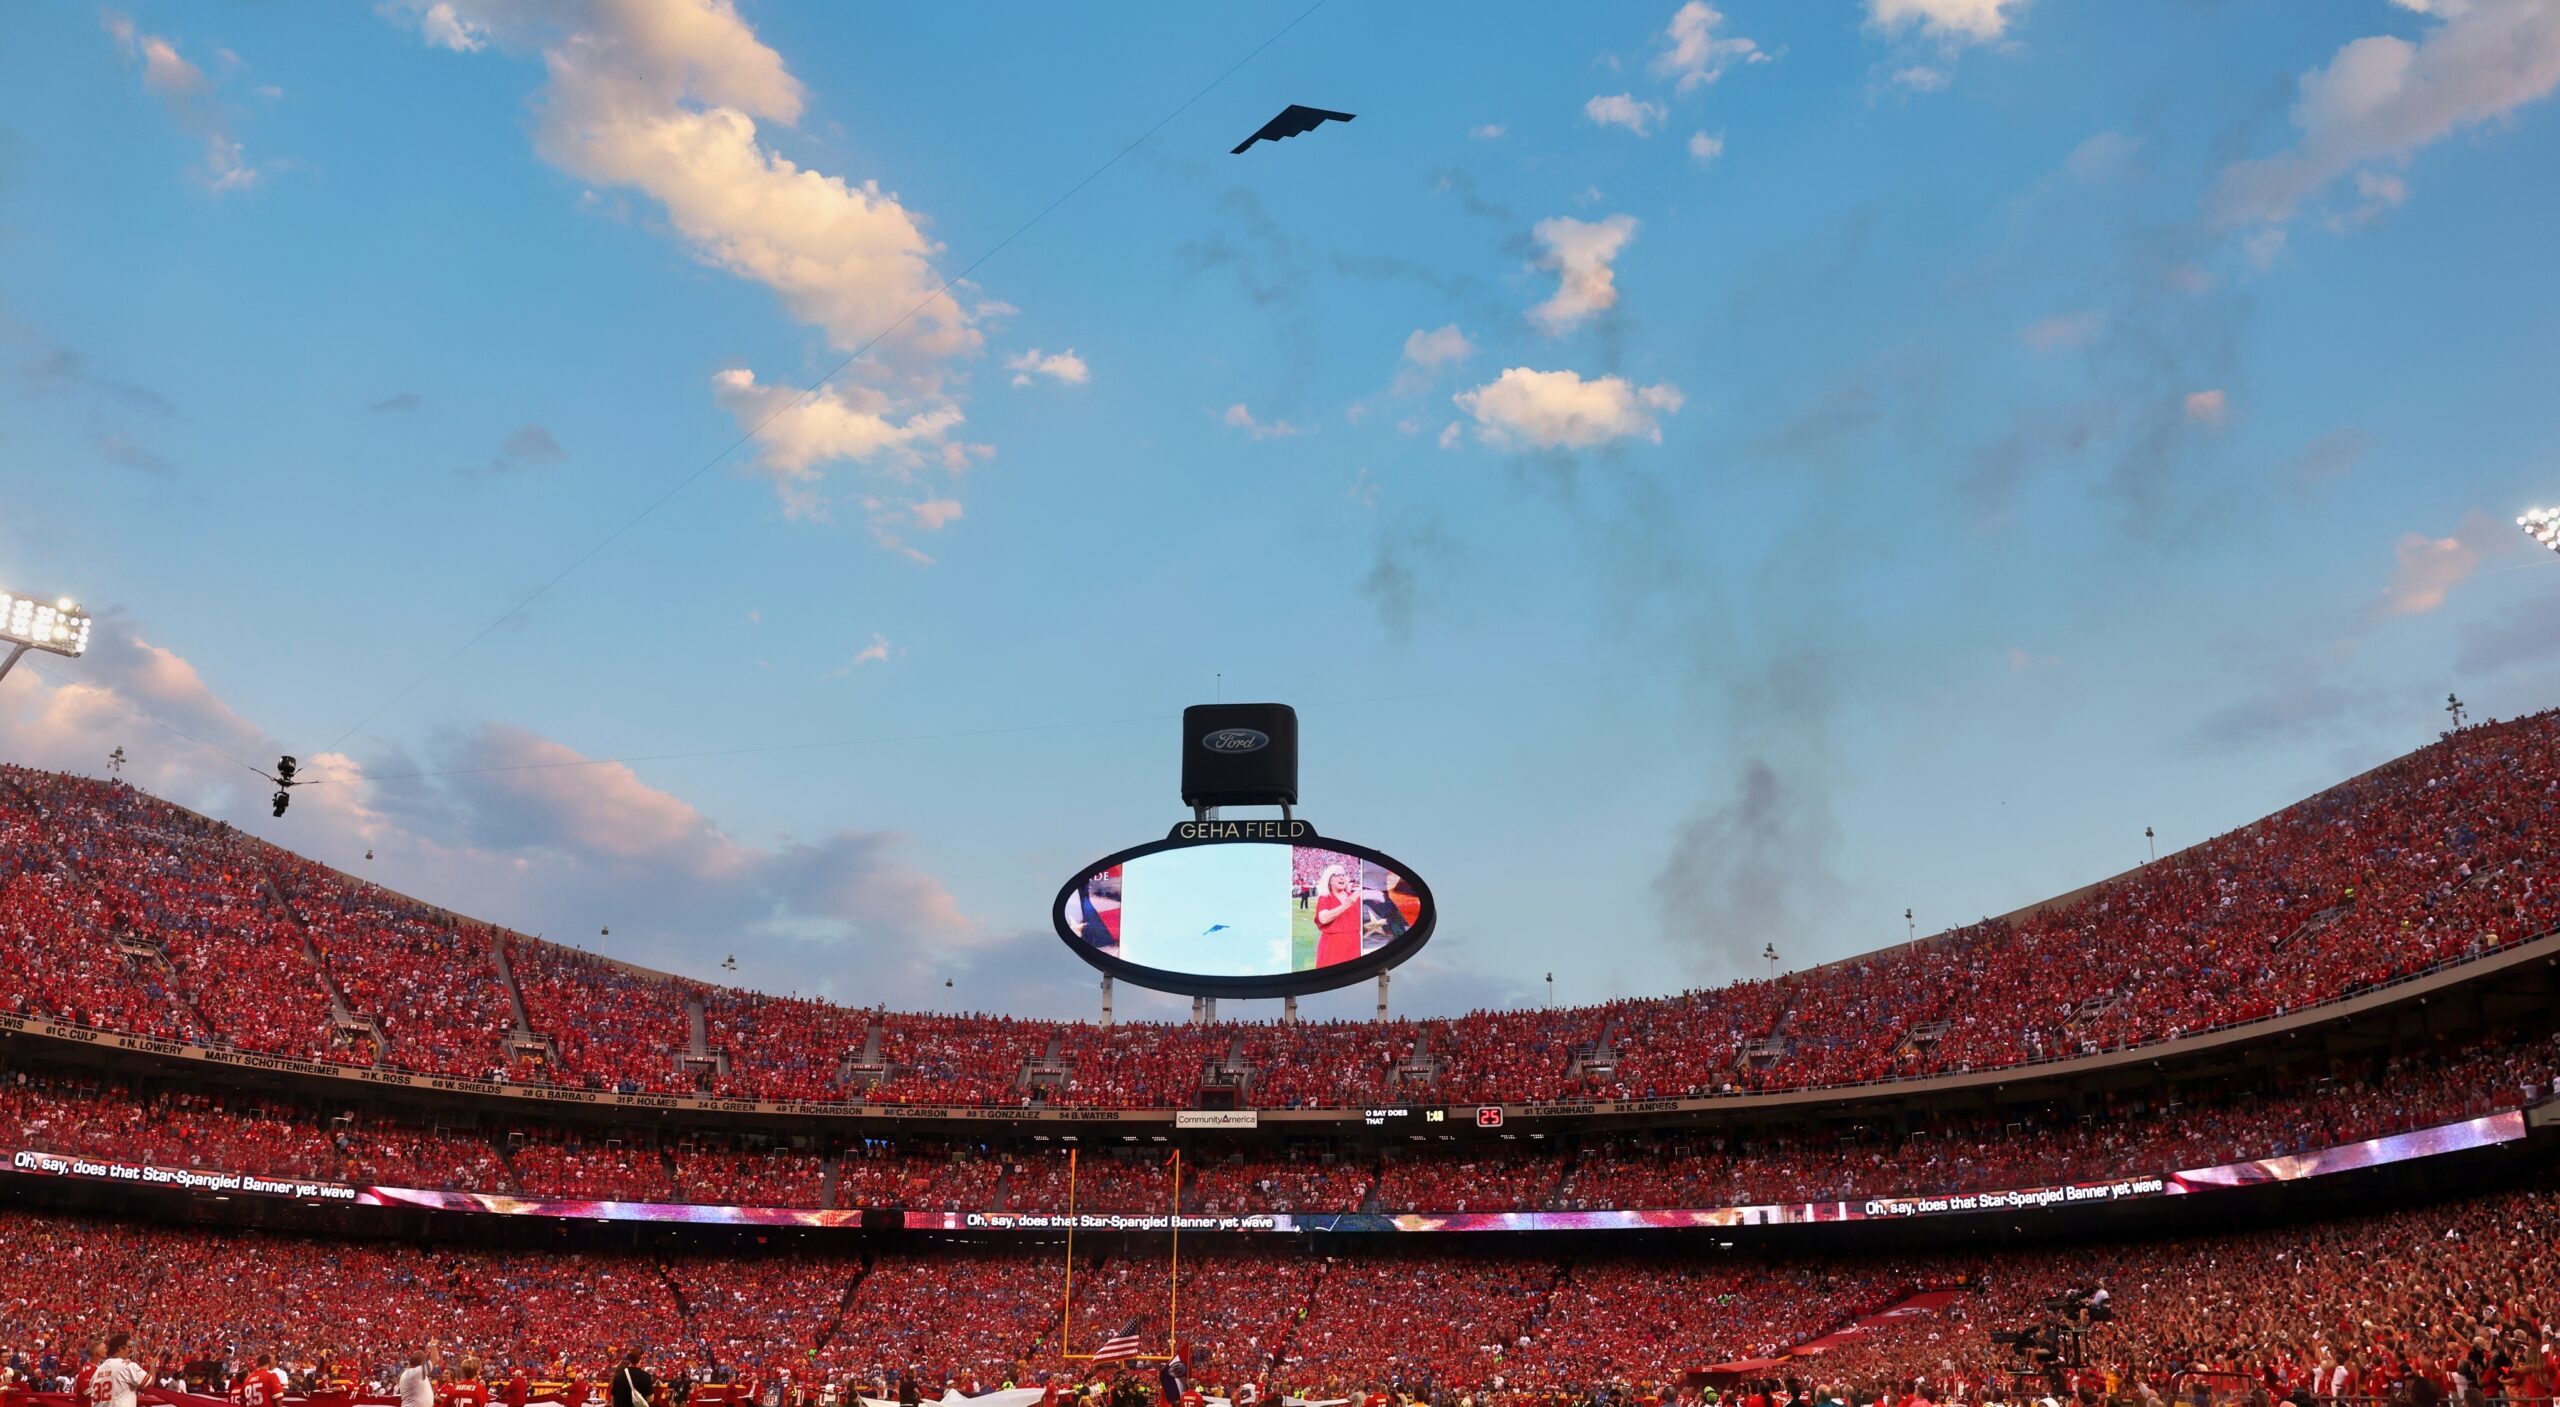 B-2 Plane Flyover at NFL Opening Night Had Fans In Awe (VIDEO)